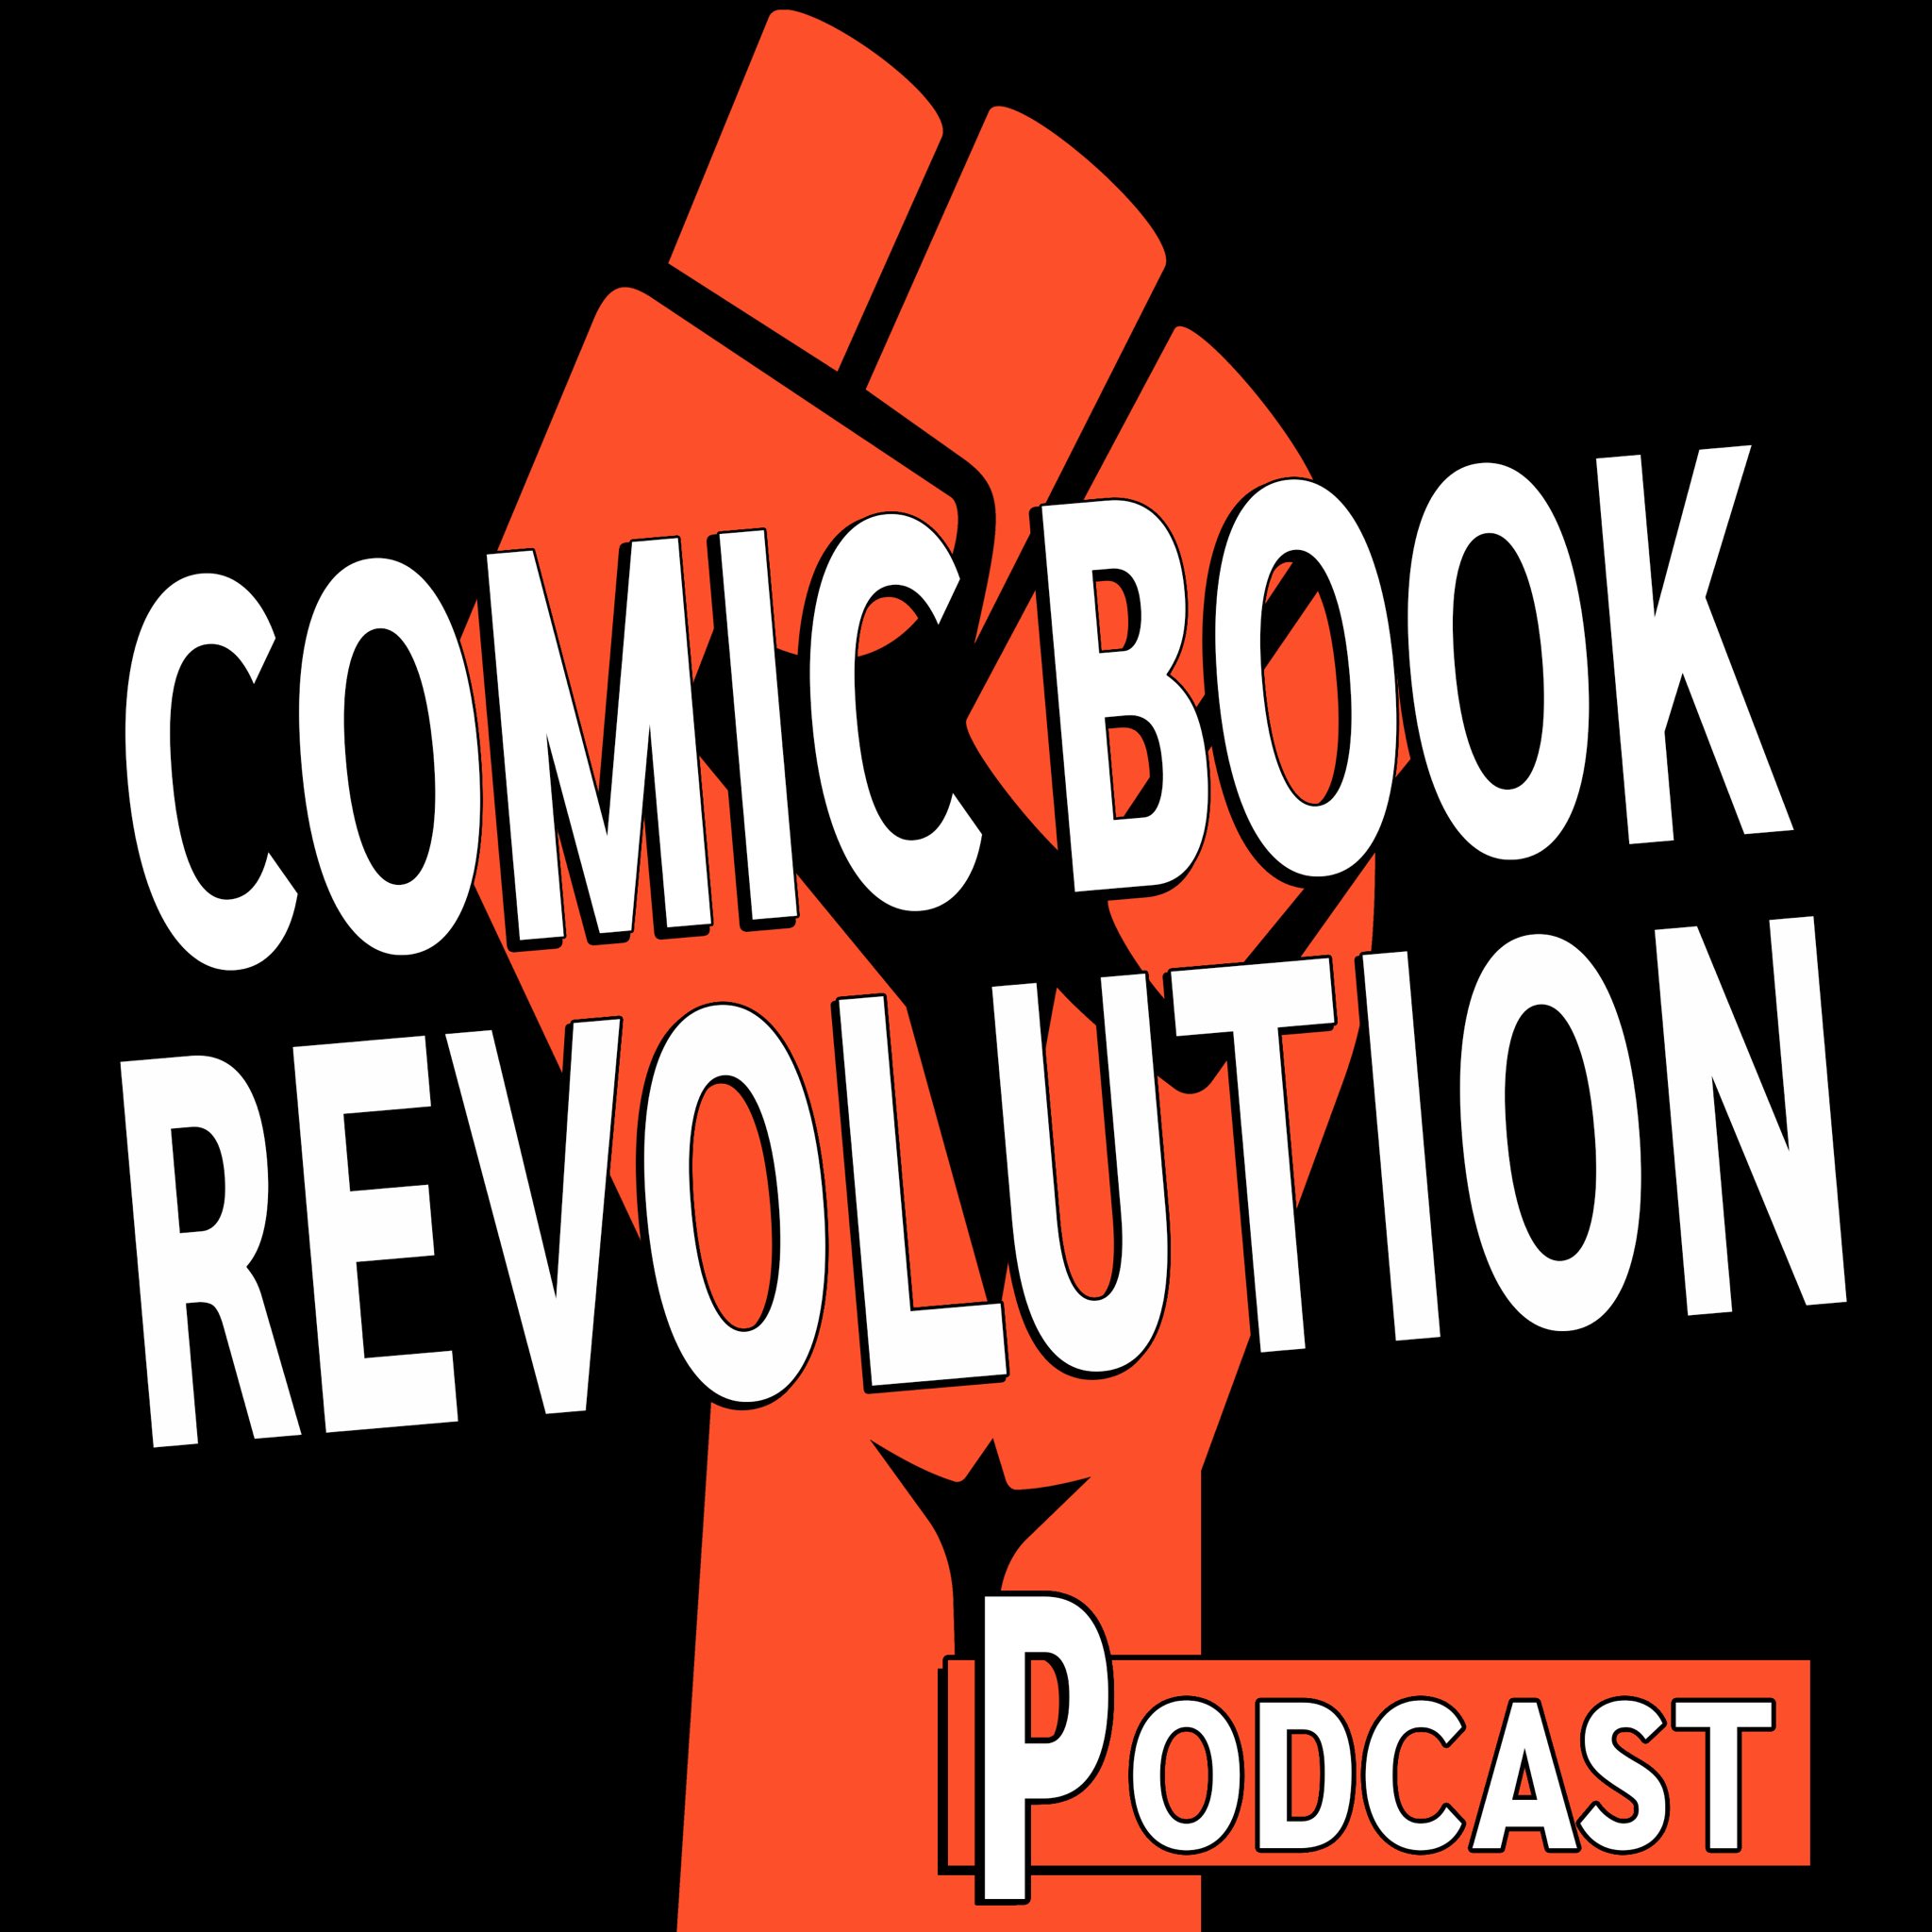 Spider-Man Beyond Review - Comic Book Revolution Podcast Episode 87